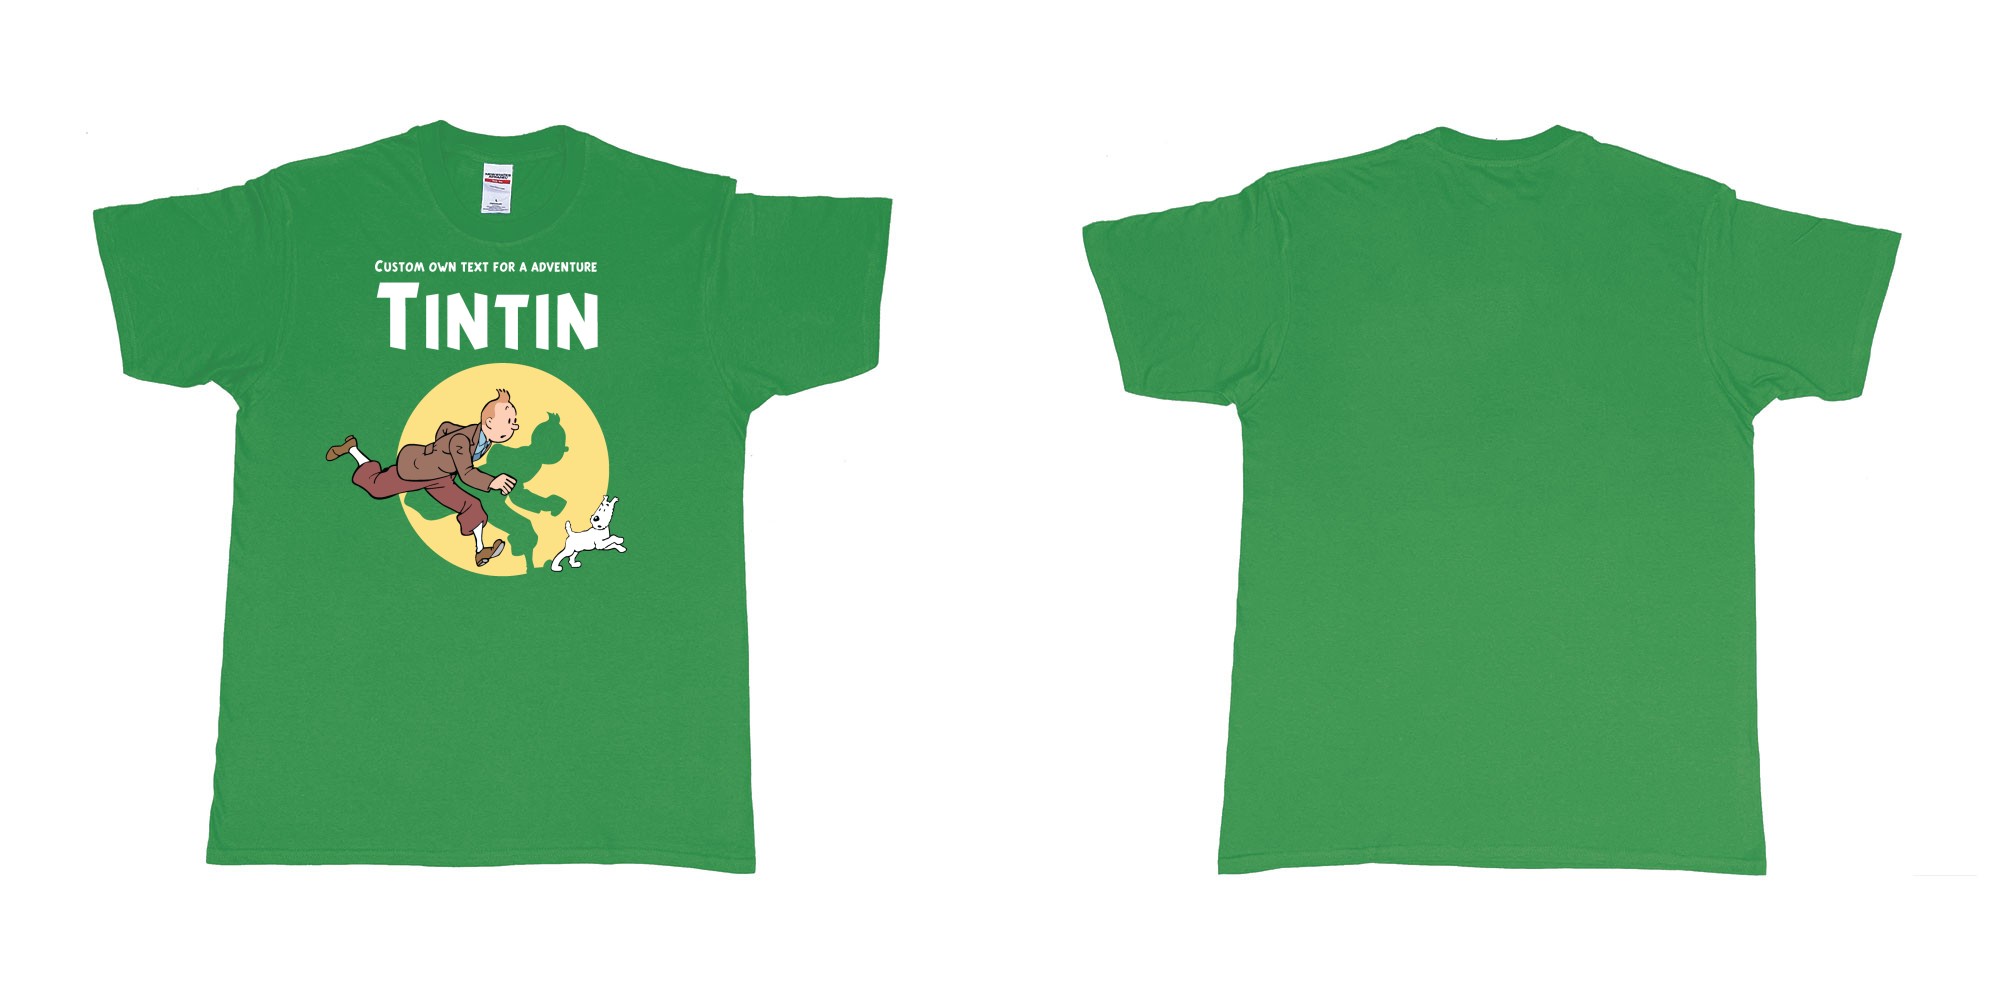 Custom tshirt design tintin custom text for adventure teeshirt printing in fabric color irish-green choice your own text made in Bali by The Pirate Way